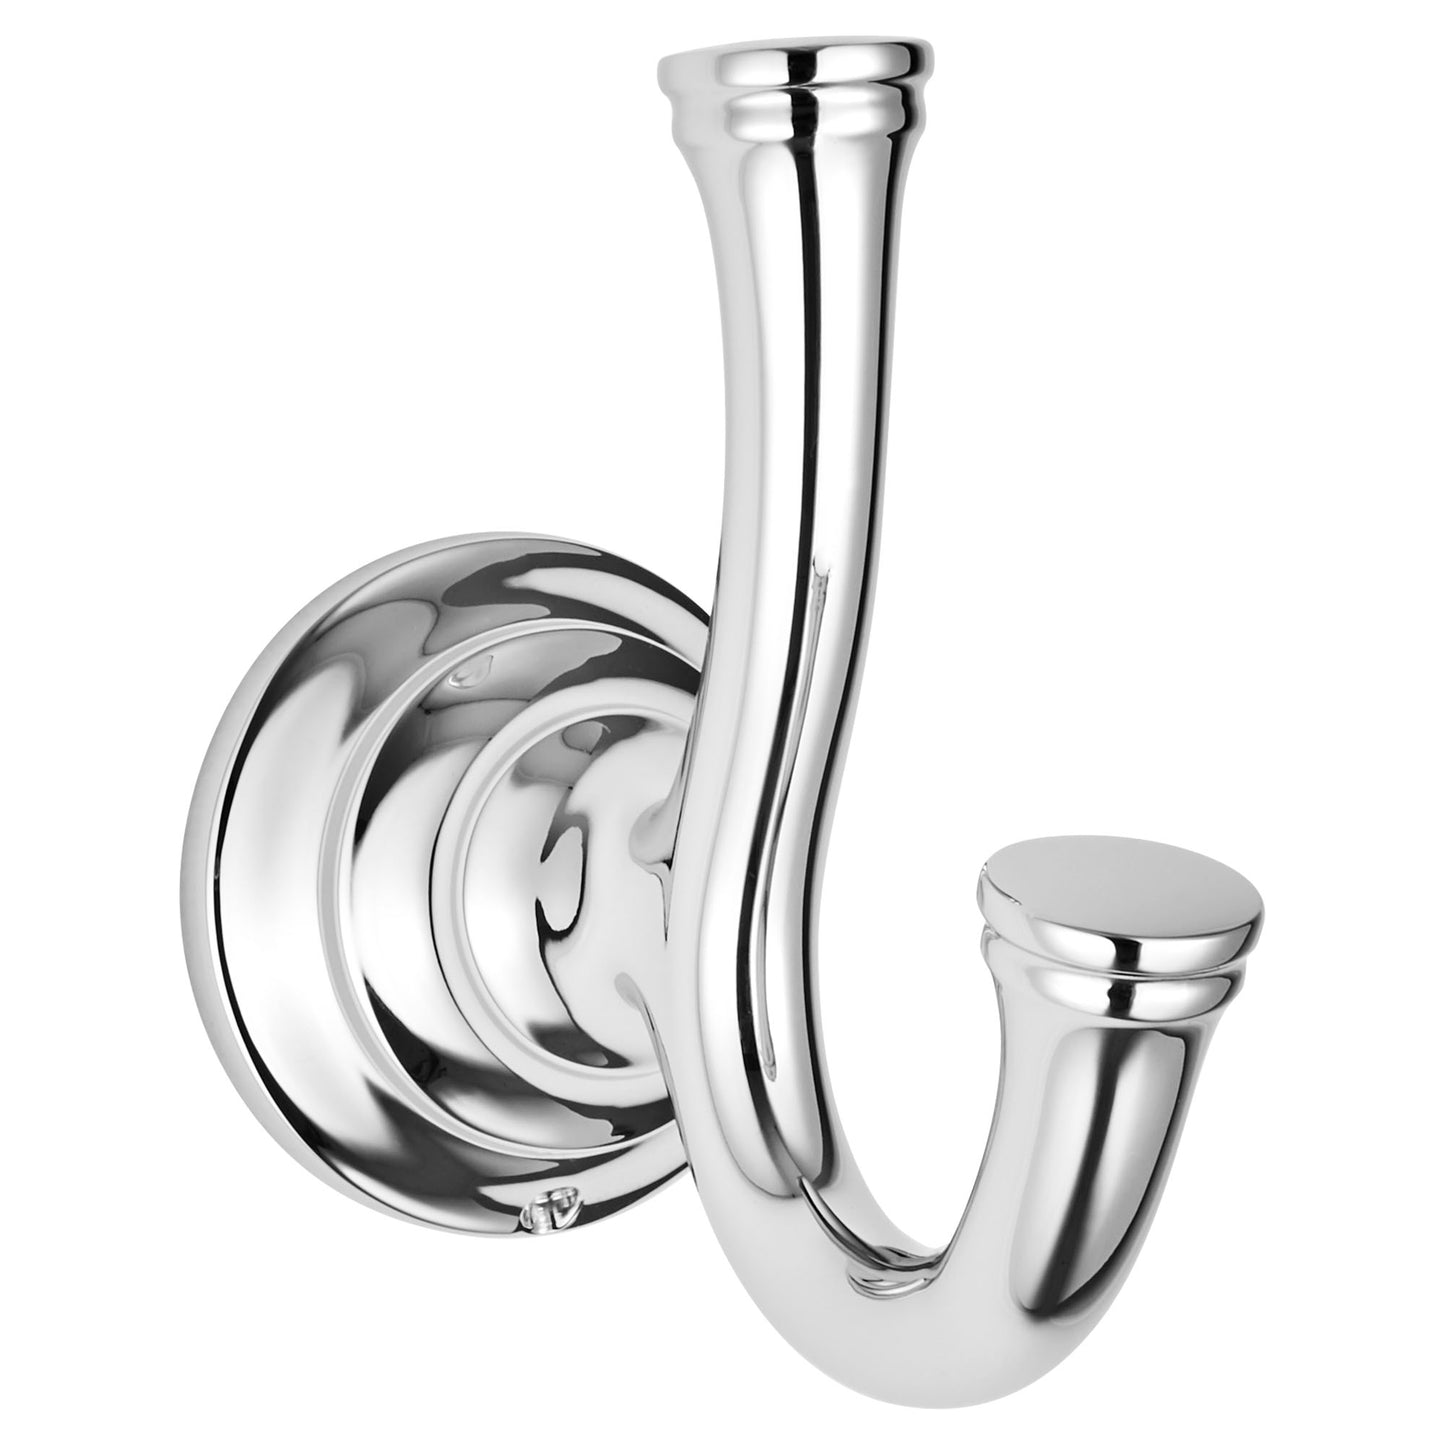 AMERICAN-STANDARD 7052210.002, Delancey Double Robe Hook in Chrome